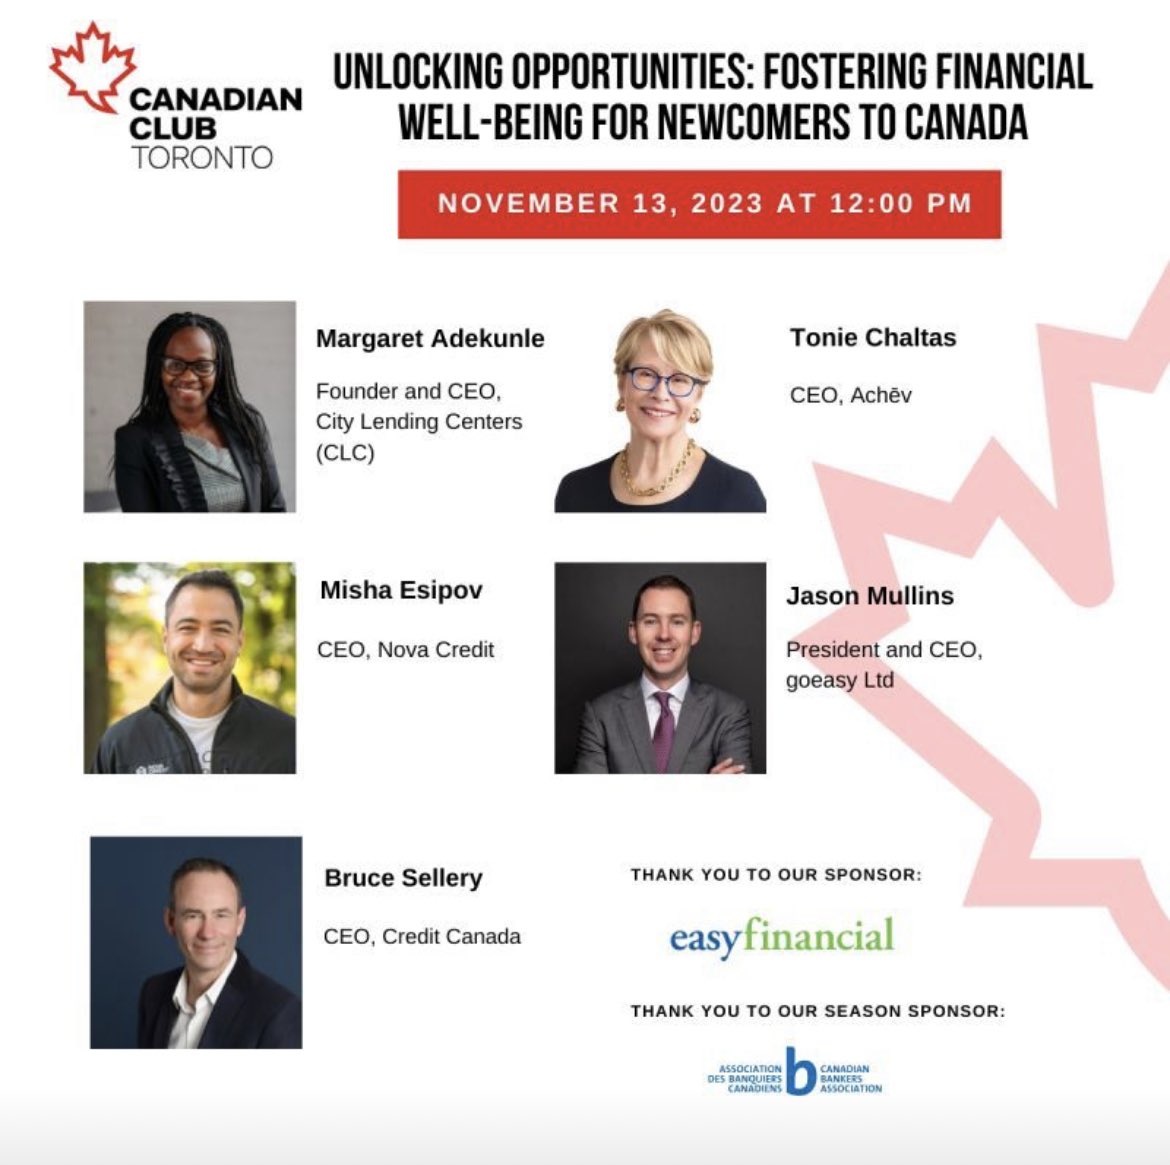 I am honoured to be on this panel with amazing leaders like Tonie Chaltas, Jason Mullins and Misha Esipov. Moderated by Canadian Club Toronto 

Financial Inclusion meets DEI

#inclusivefinance